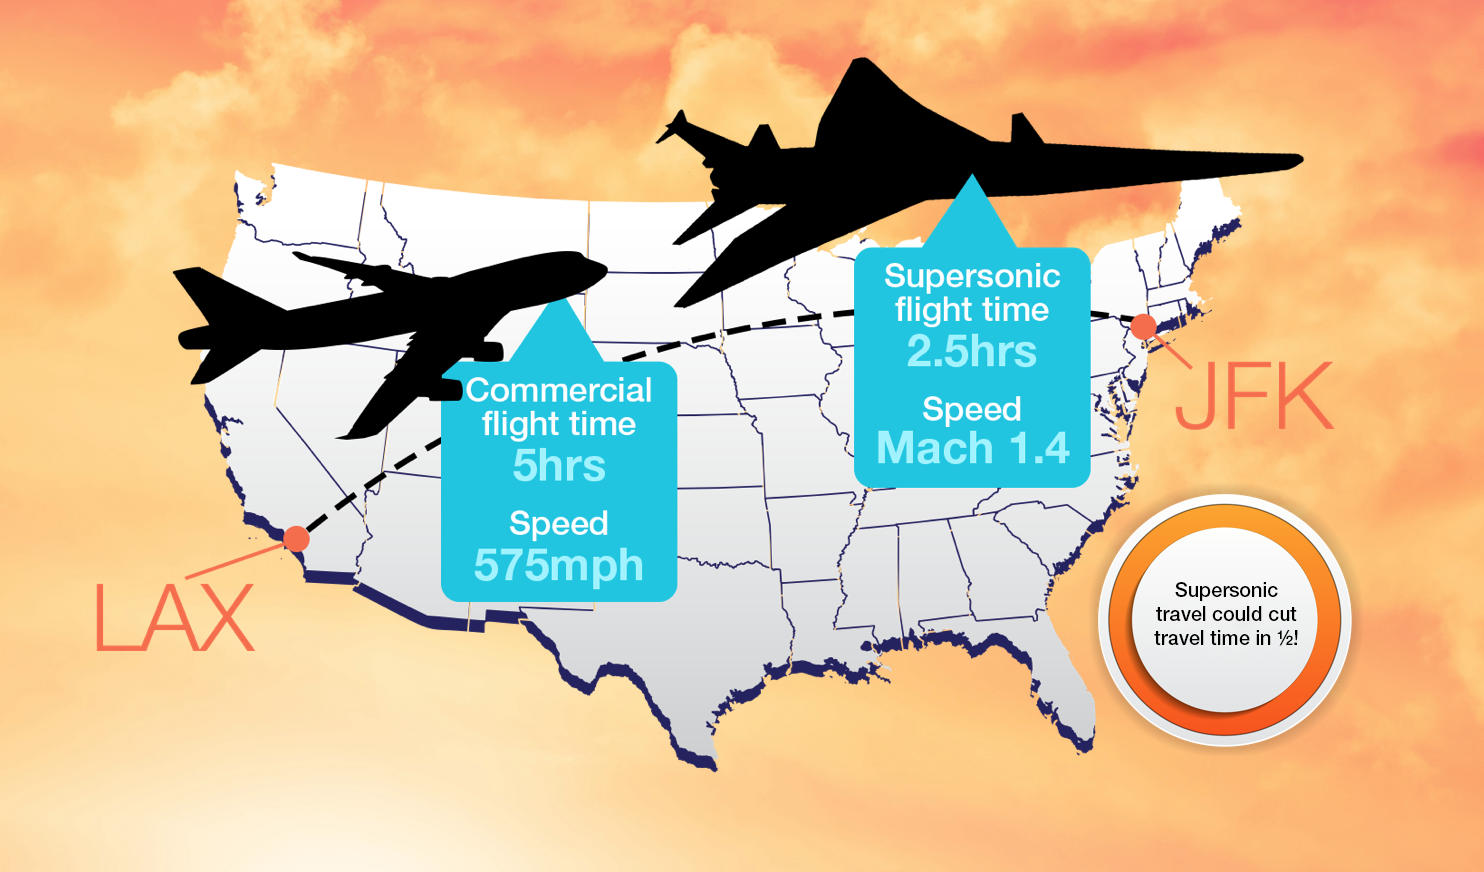 Map of US showing flight times from LAX to JFK. Commercial flight time: 5 hours. Speed: 575 mph. Supersonic flight time: 2.5 hours. Speed Mach 1.4.